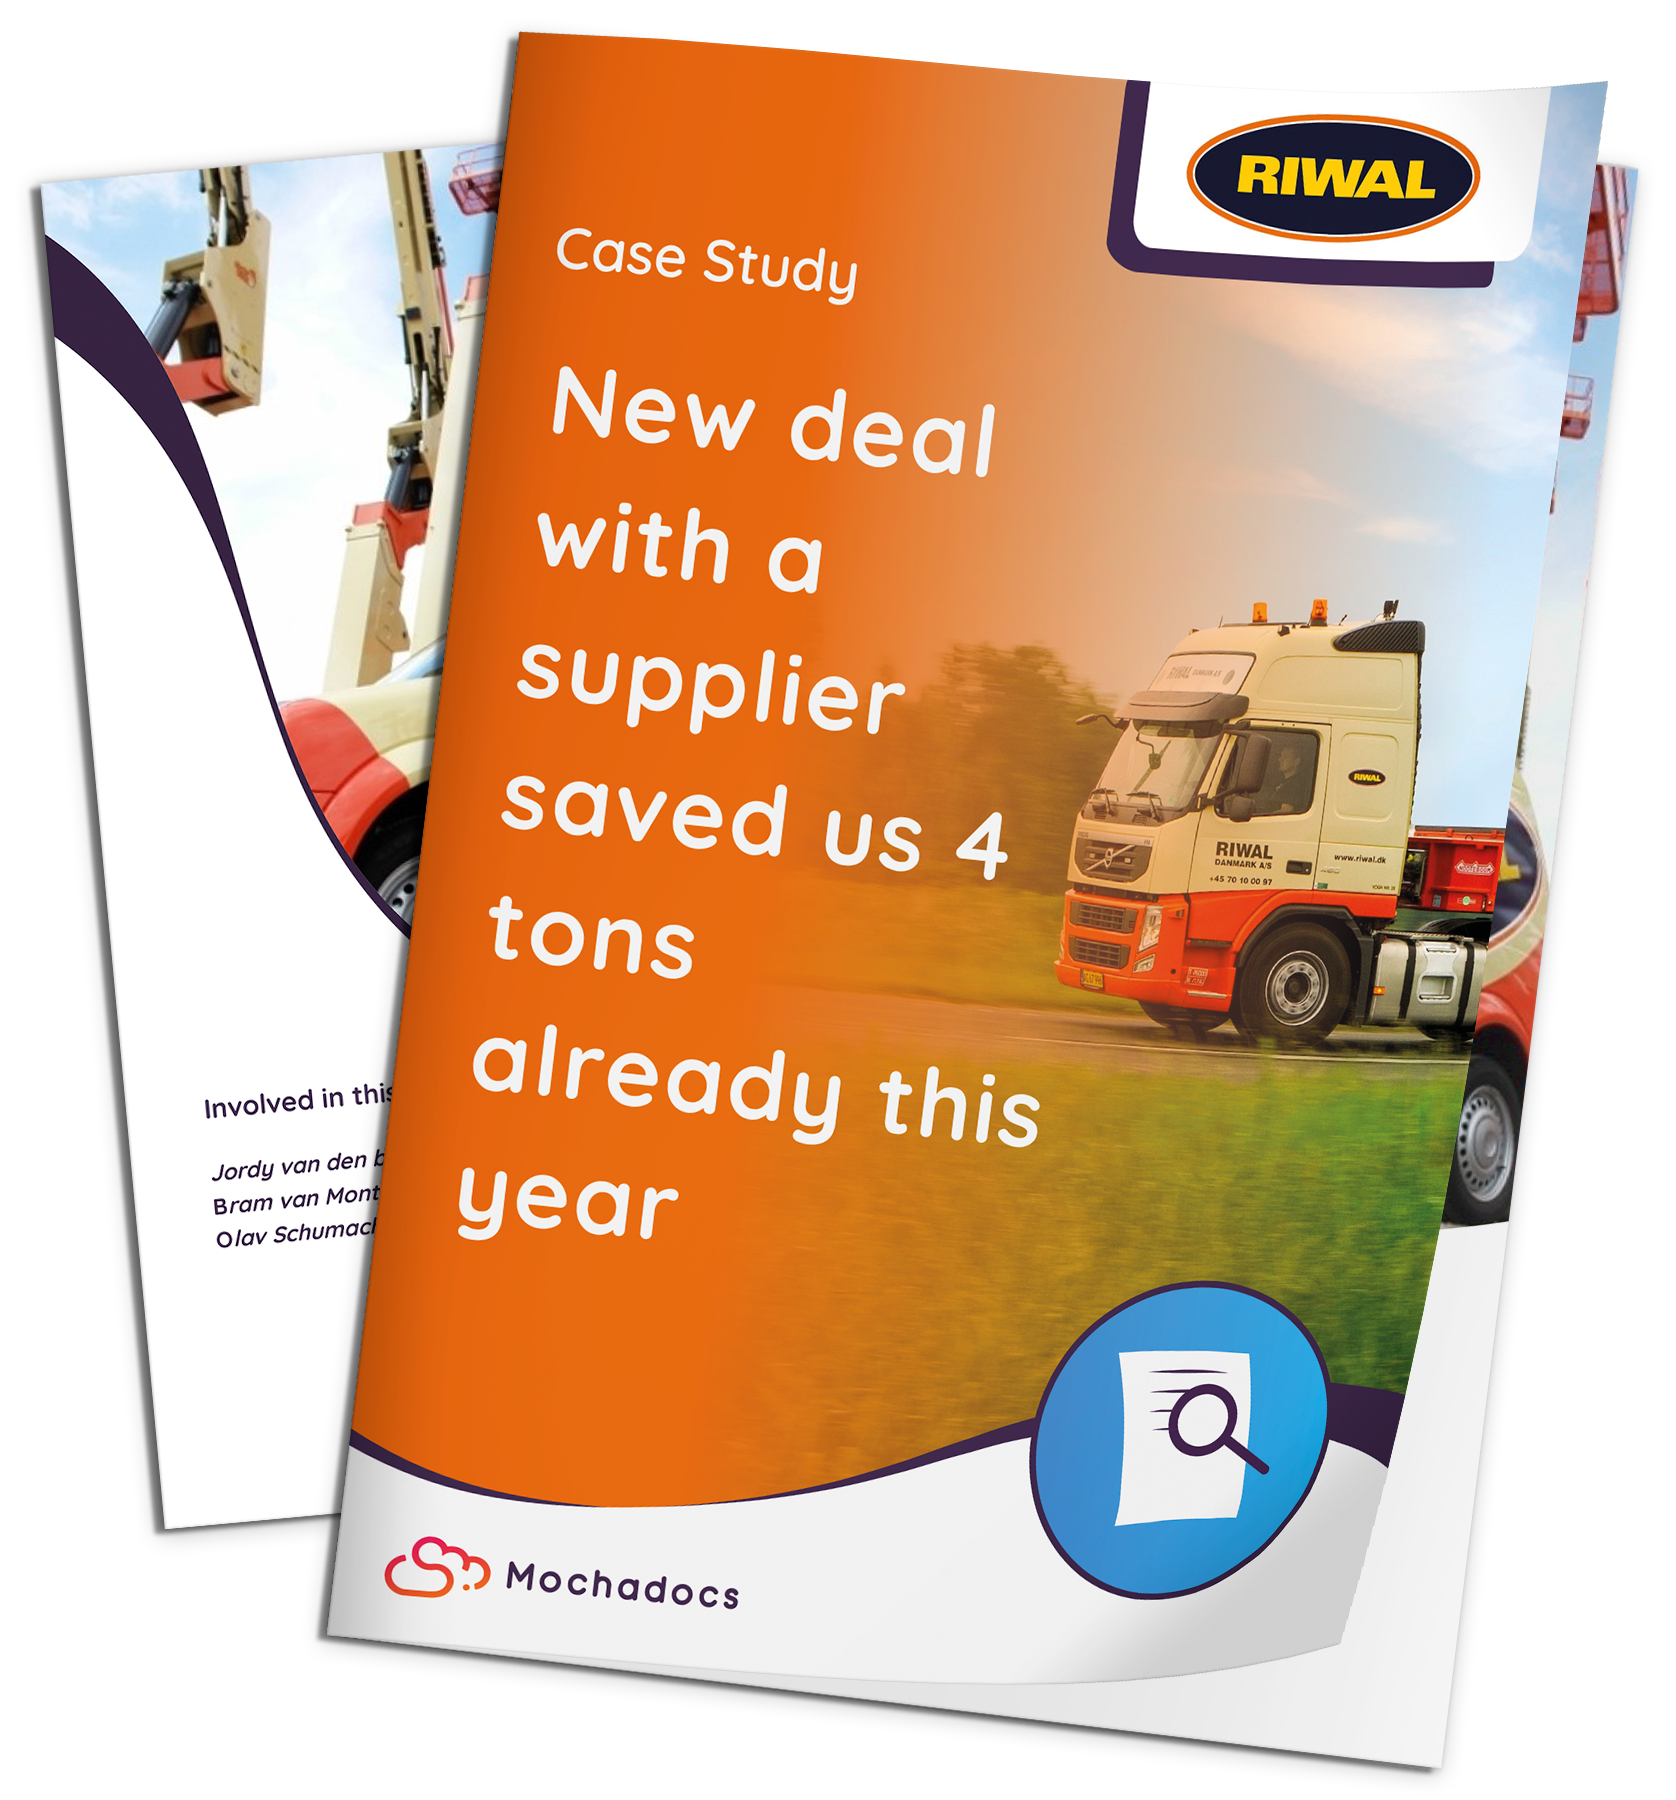 Mochadocs - Contract Management - Case Study - RIWAL - New deal with a supplier saved us 4 tons already this year